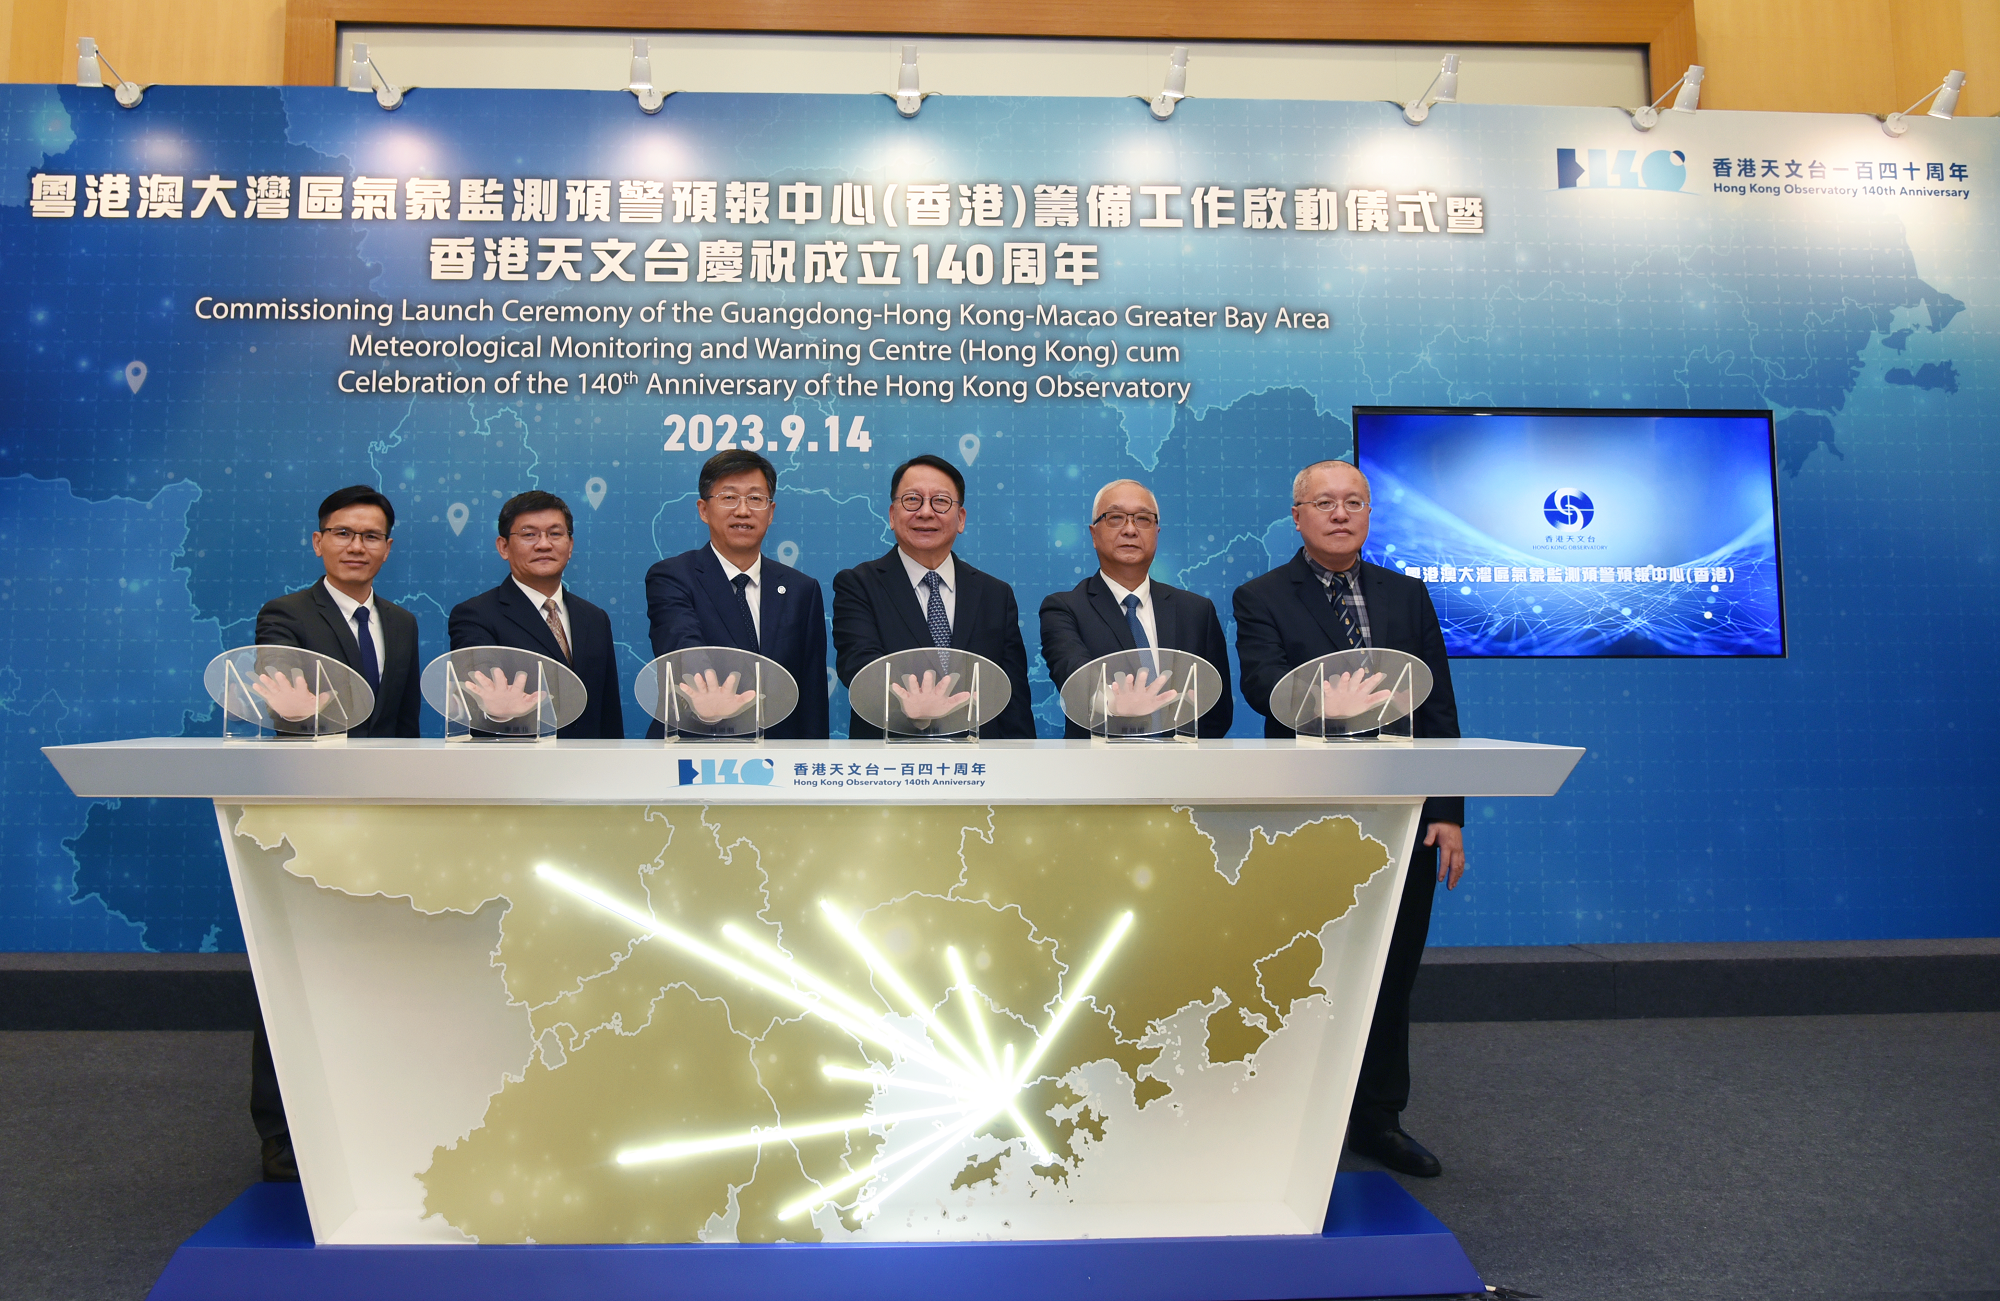 The preparation work for the Guangdong-Hong Kong-Macao Greater Bay Area Meteorological Monitoring and Warning Center (Hong Kong) officially commenced today (September 14). Photo shows the Chief Secretary for Administration, Mr Chan Kwok-ki (third right); the Administrator of the China Meteorological Administration, Dr Chen Zhenlin (third left); the Secretary for Environment and Ecology, Mr Tse Chin-wan (second right); the Director of the Guangdong Meteorological Service, Mr Zhuang Xudong (second left); the Director of Macao Meteorological and Geophysical Bureau, Mr Leong Weng-kun (first left); and the Director of the Hong Kong Observatory, Dr Chan Pak-wai (first right), officiating at the commissioning launch ceremony.